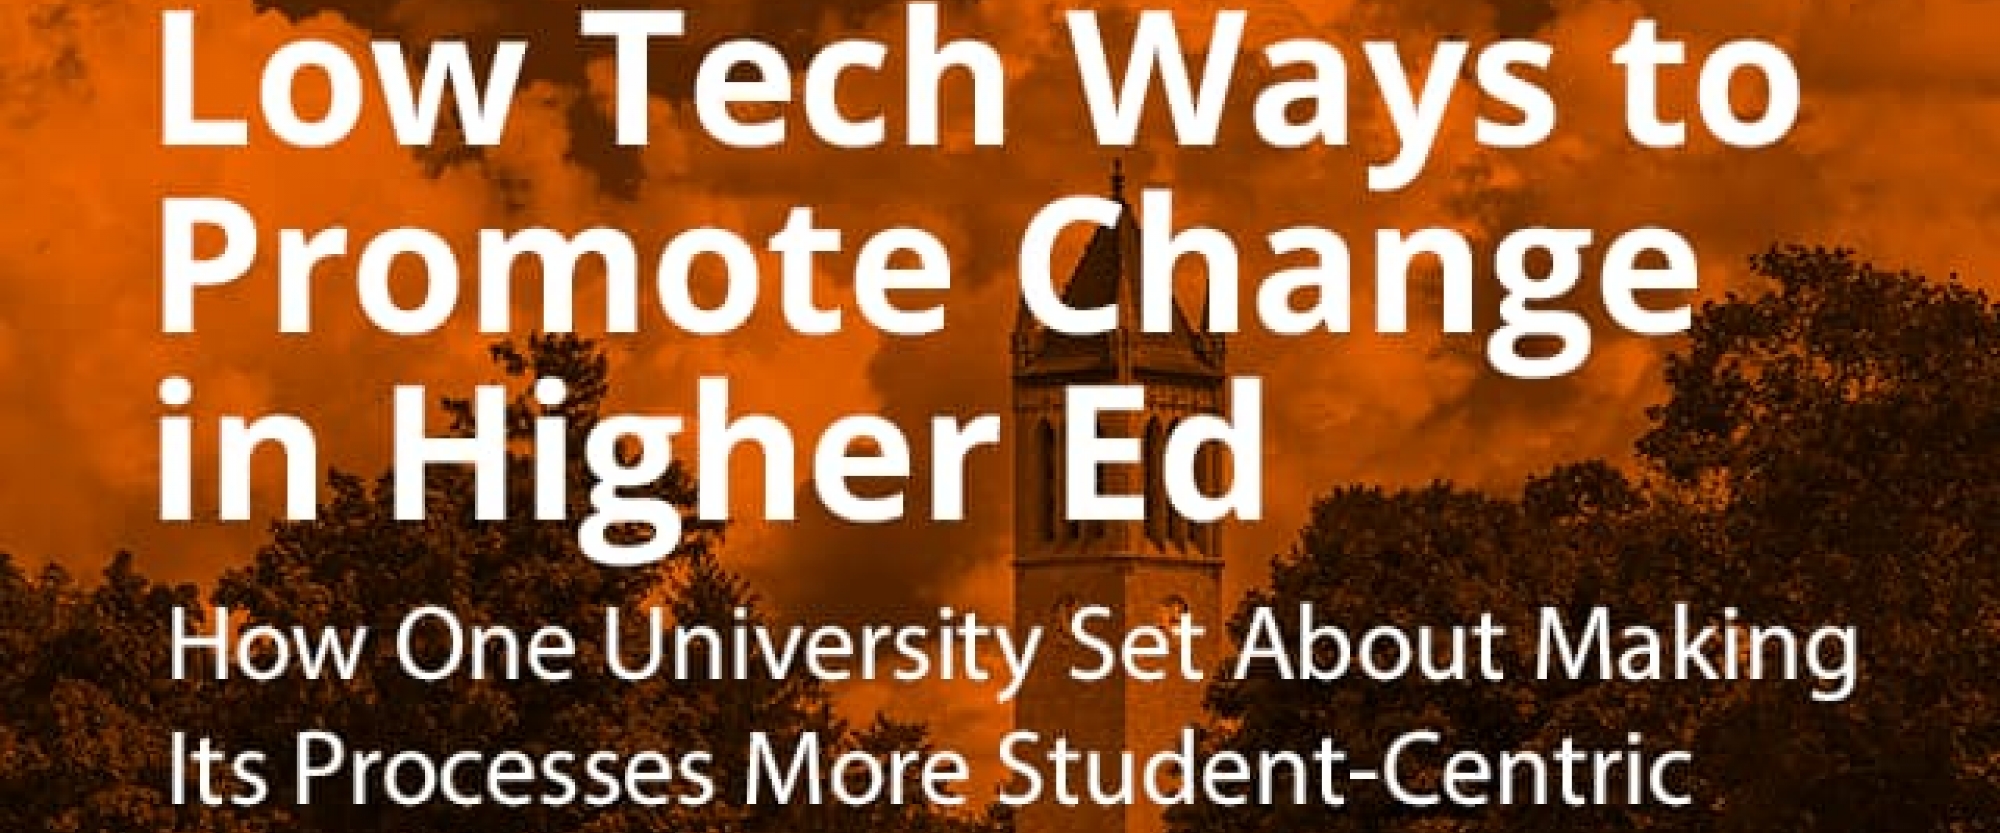 Low Tech Ways to Promote Change in Higher Ed